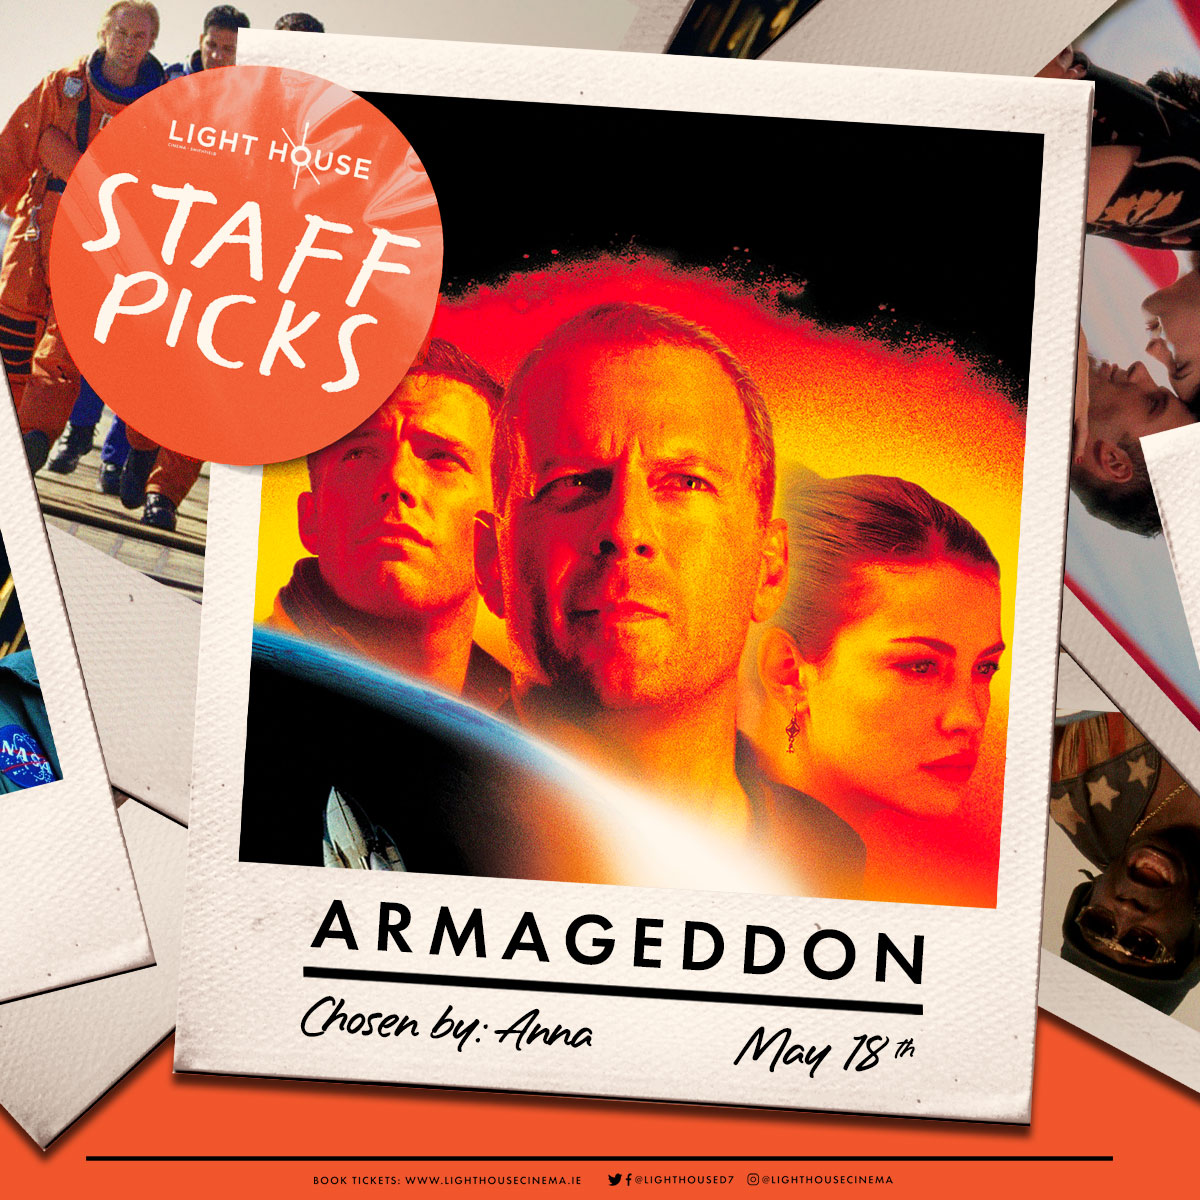 'In defence of earnestness and angry dads' 🚀

Anna is up next for #StaffPicks and has chosen ARMAGEDDON. The Willis/Affleck/Tyler helmed action juggernaut hits the big screen at Light House on May 18.

🎟 lighthousecinema.ie/film/staff-pic…